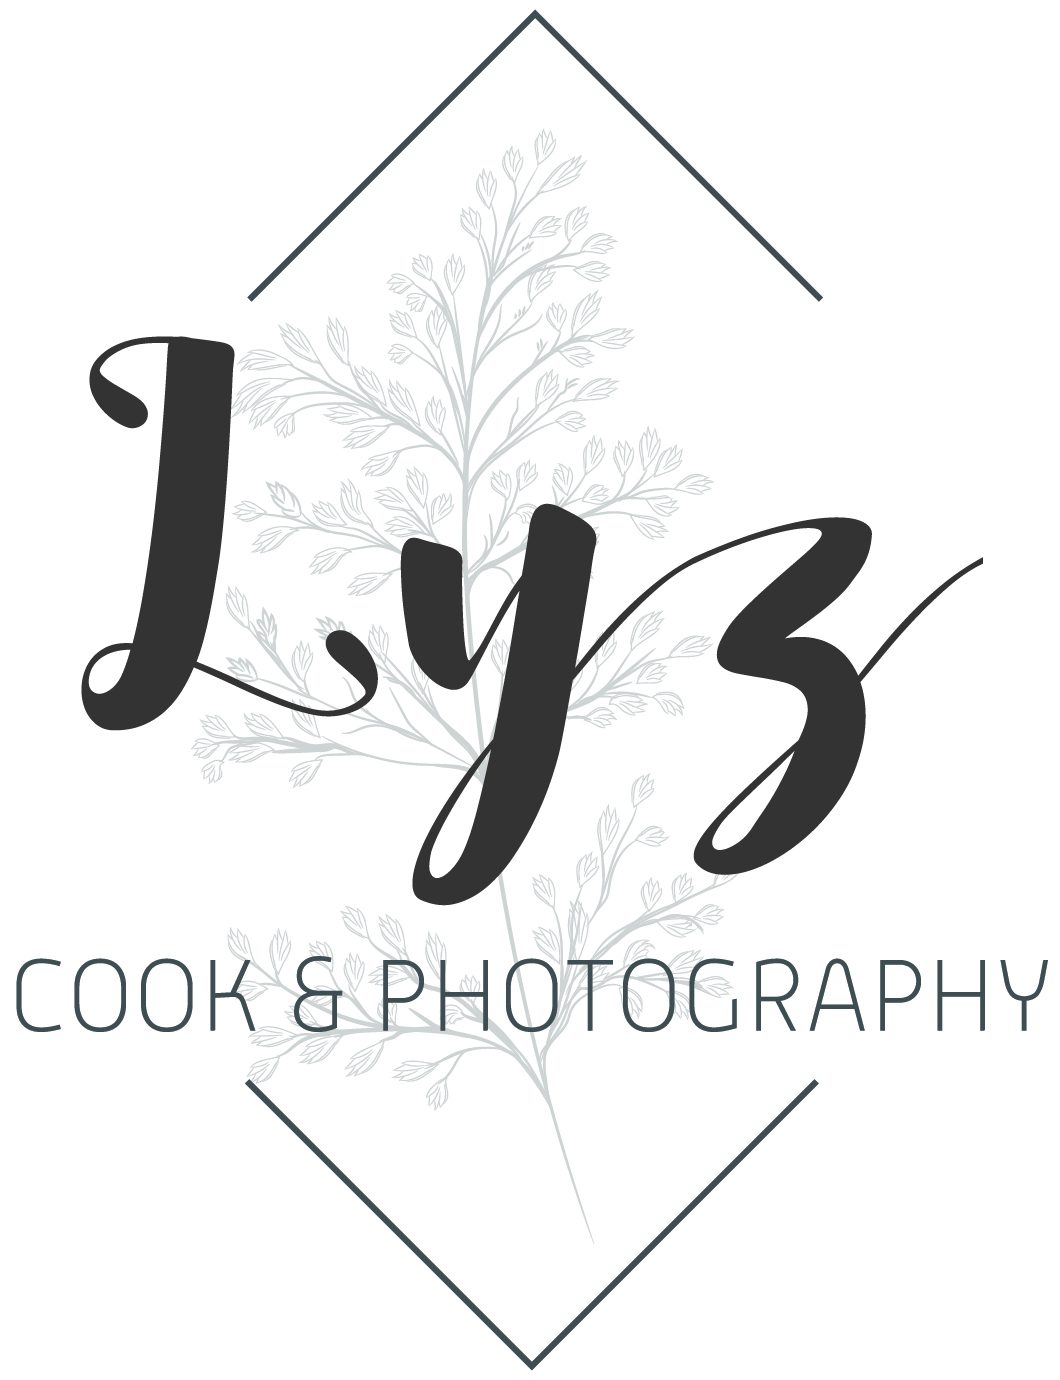 Lyz Cook & Photography